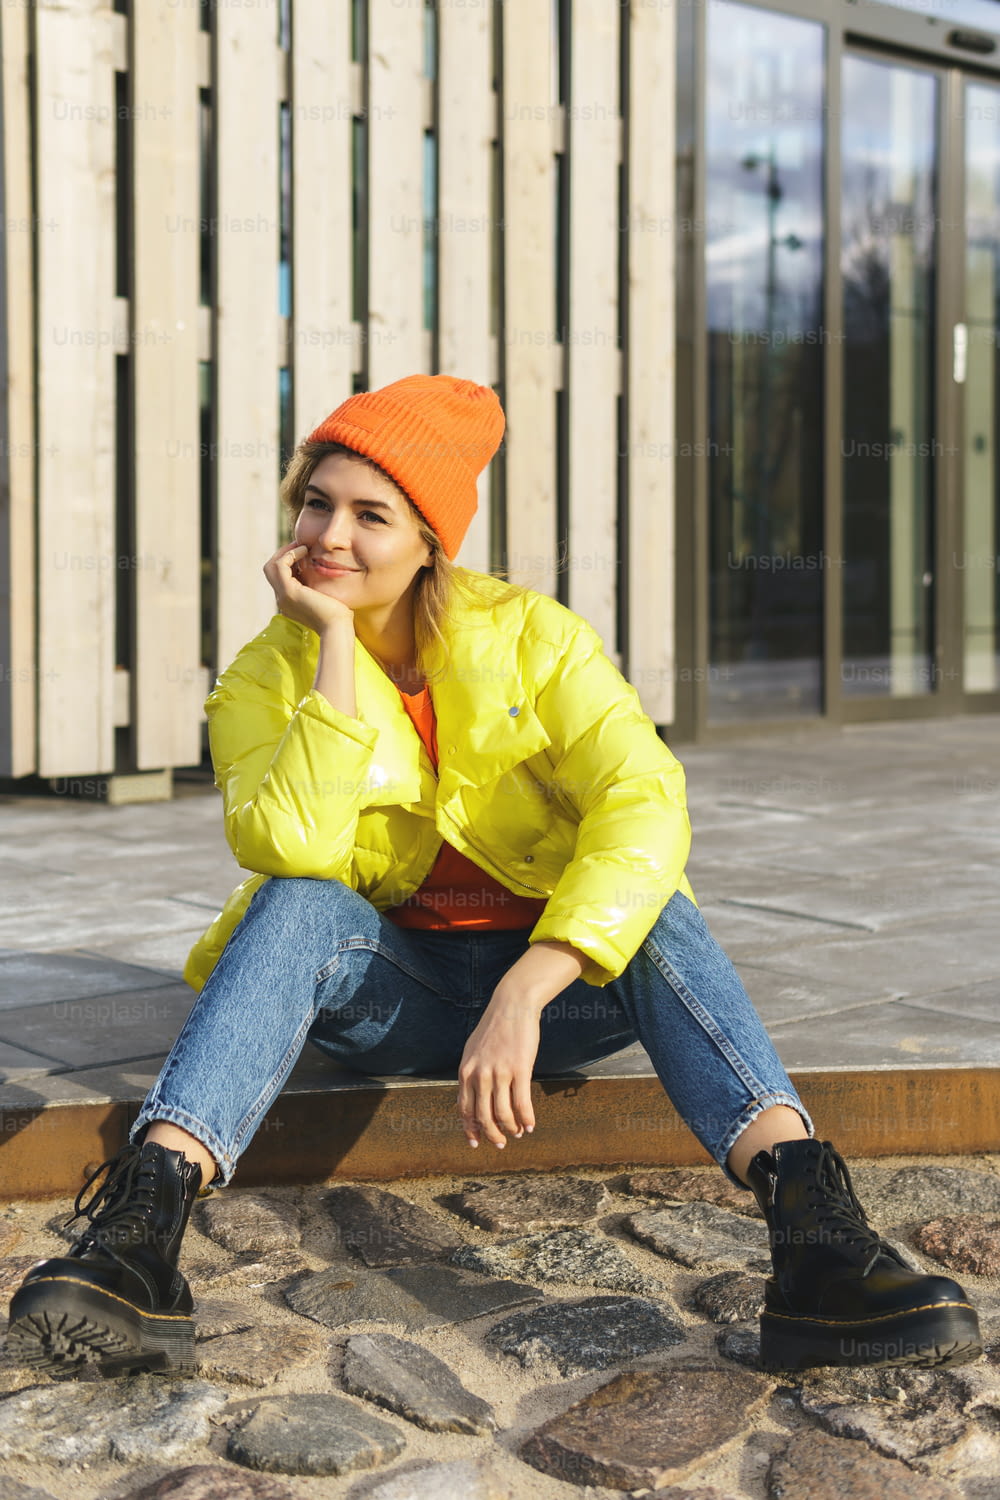 Portrait of  stylish girl wearing yellow puffer and orange knitted hat